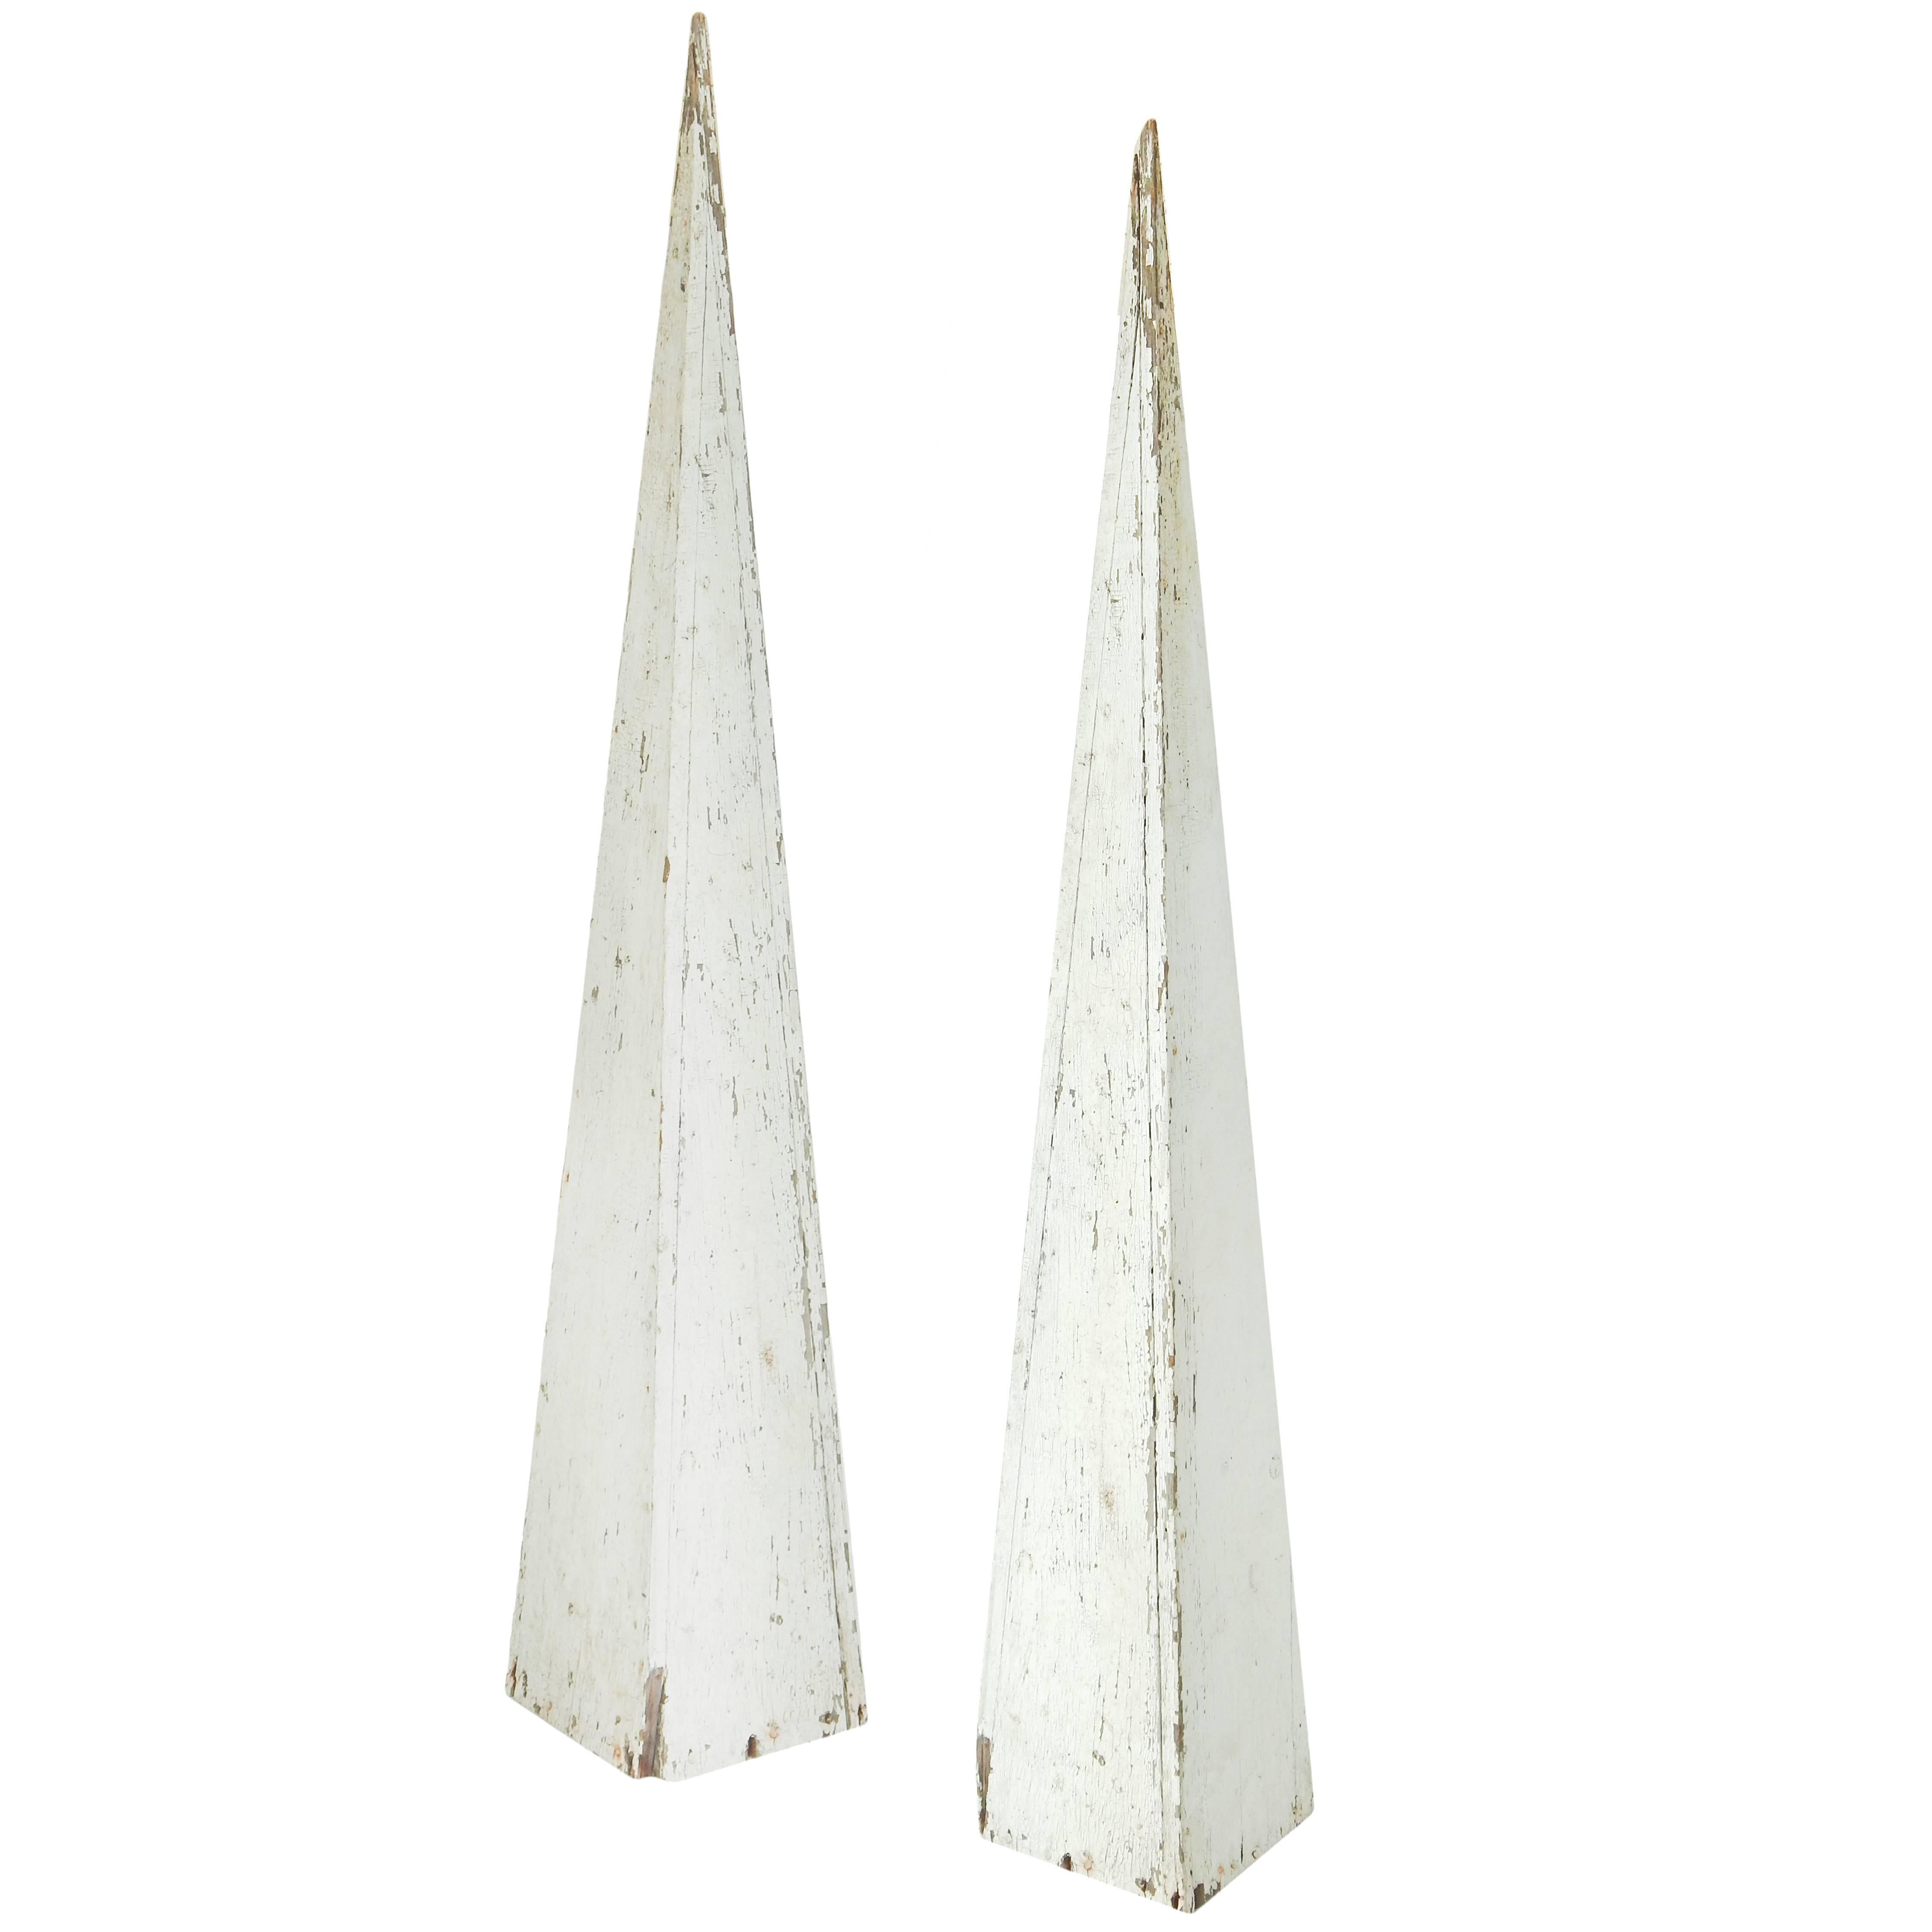 Tall Decorative Wood Spires For Sale